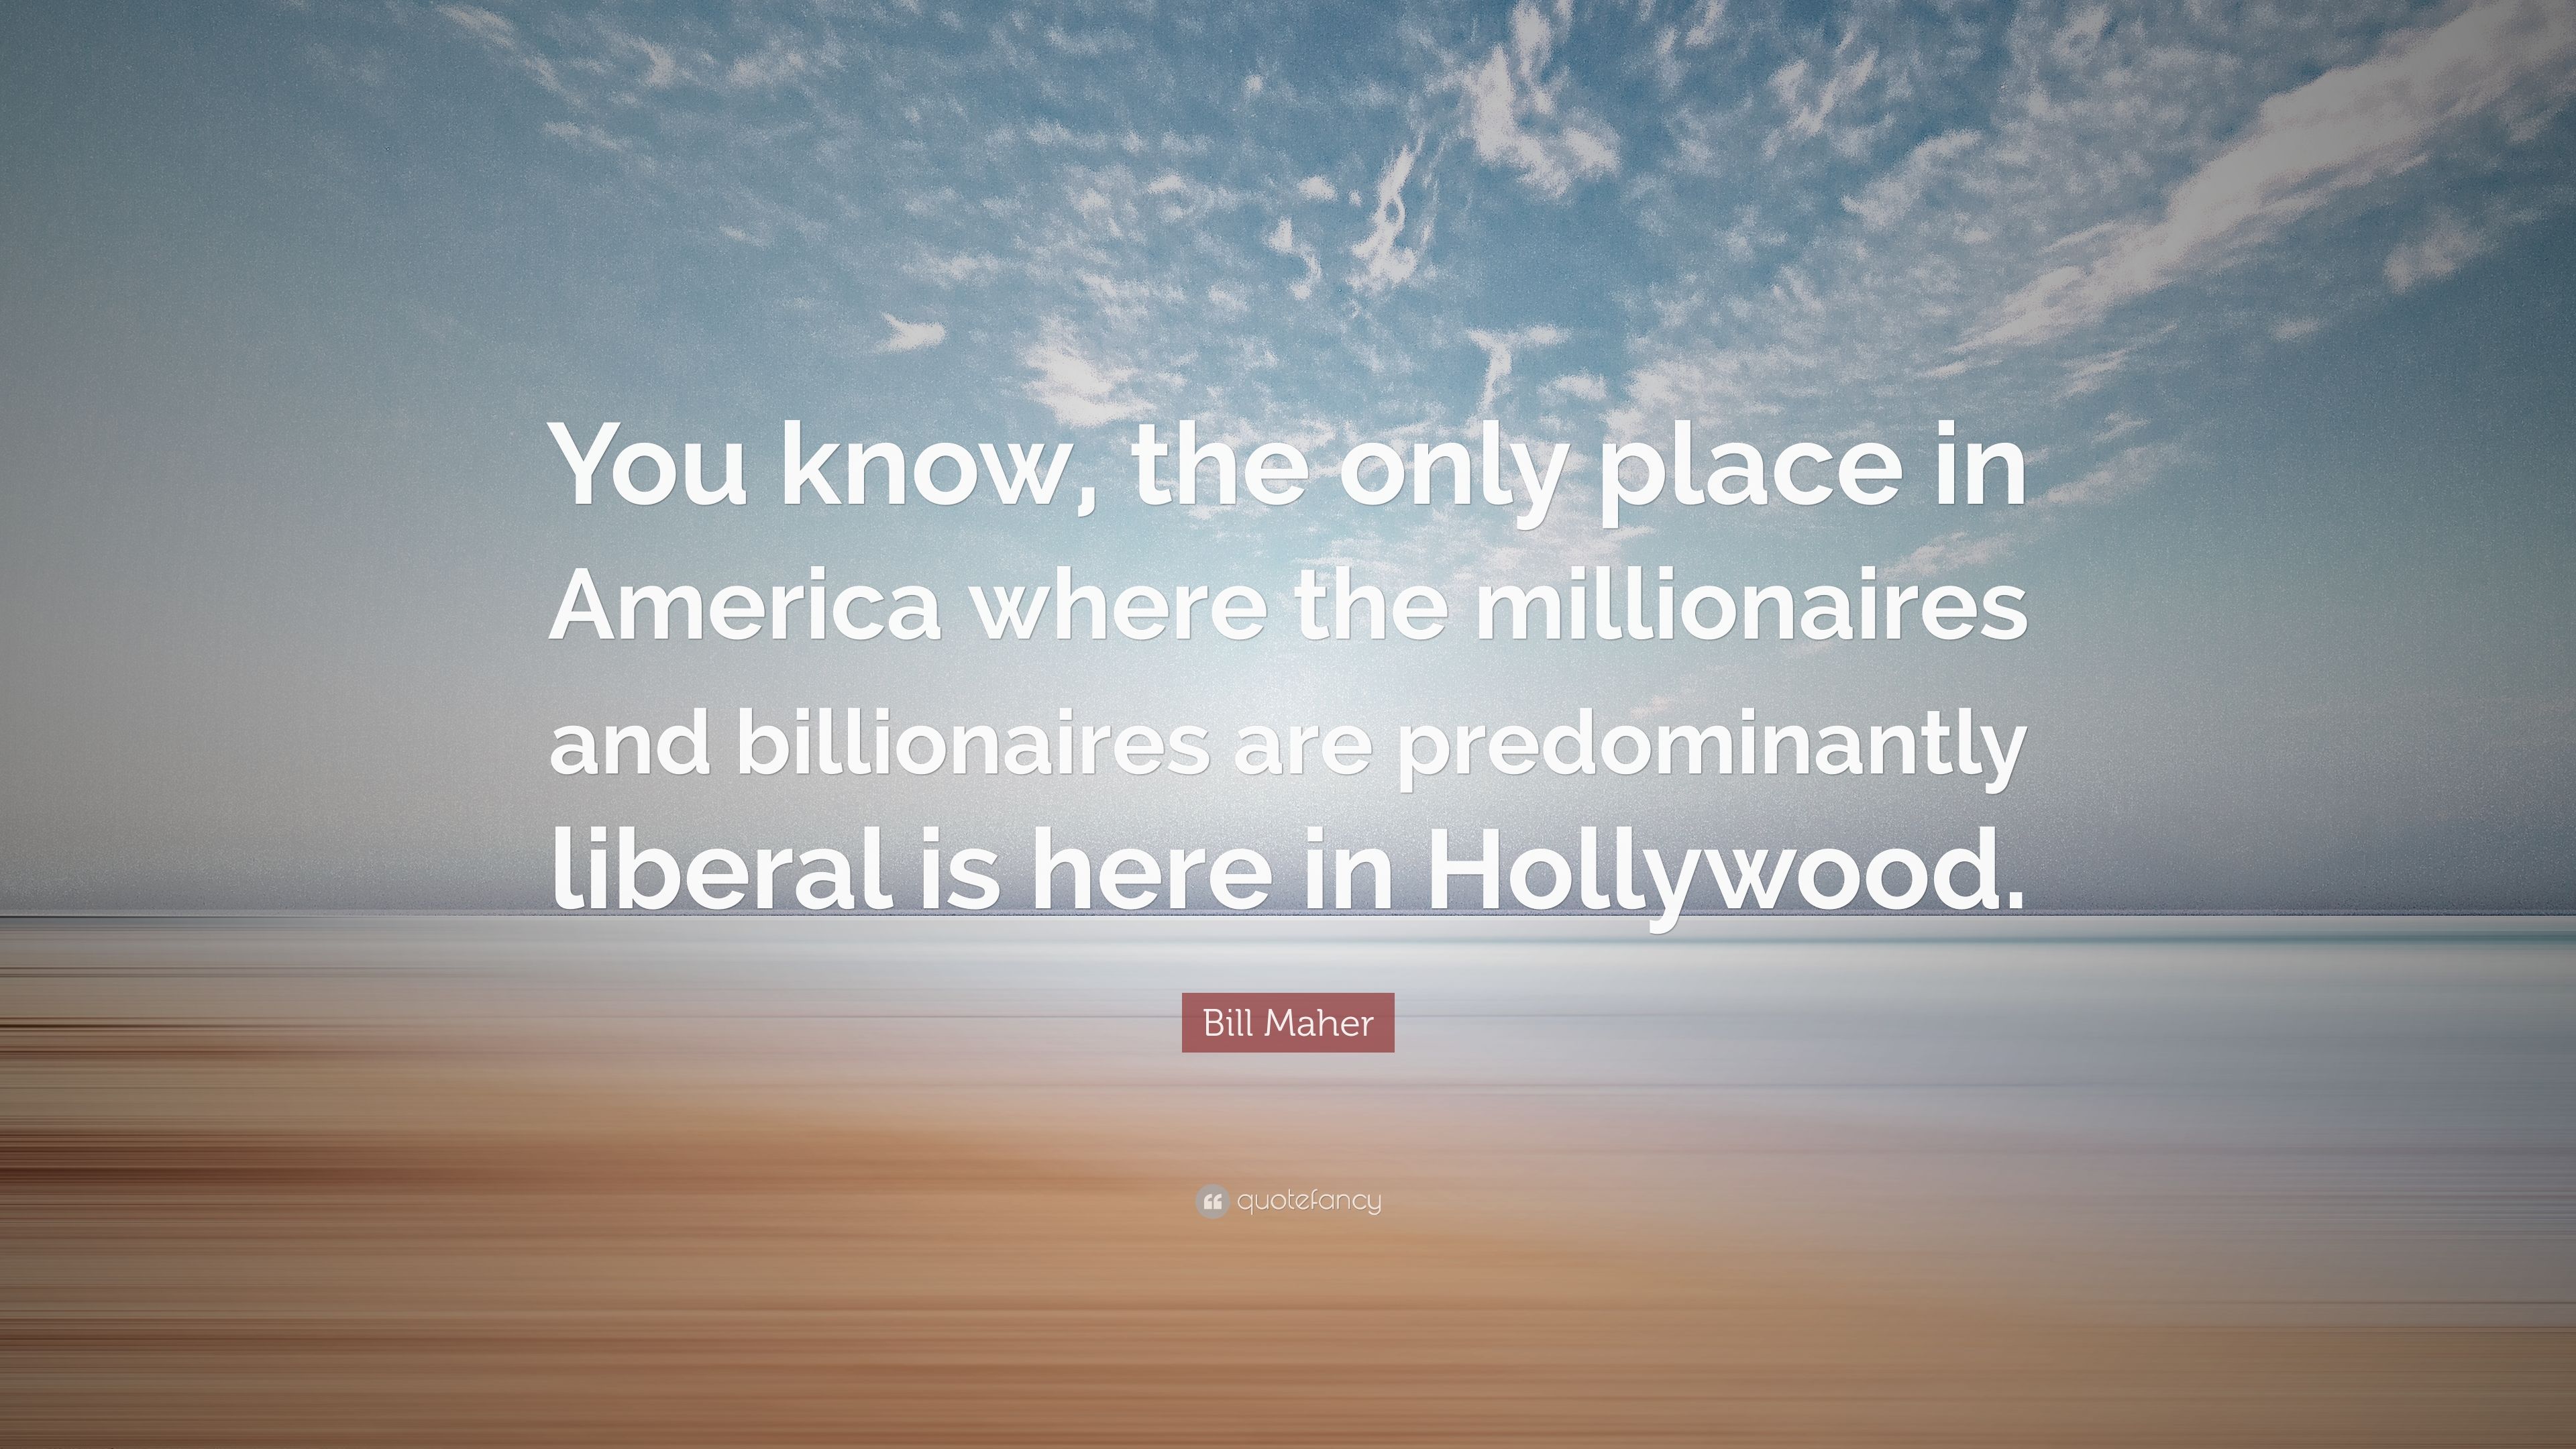 Bill Maher Quote: “You know, the only place in America where